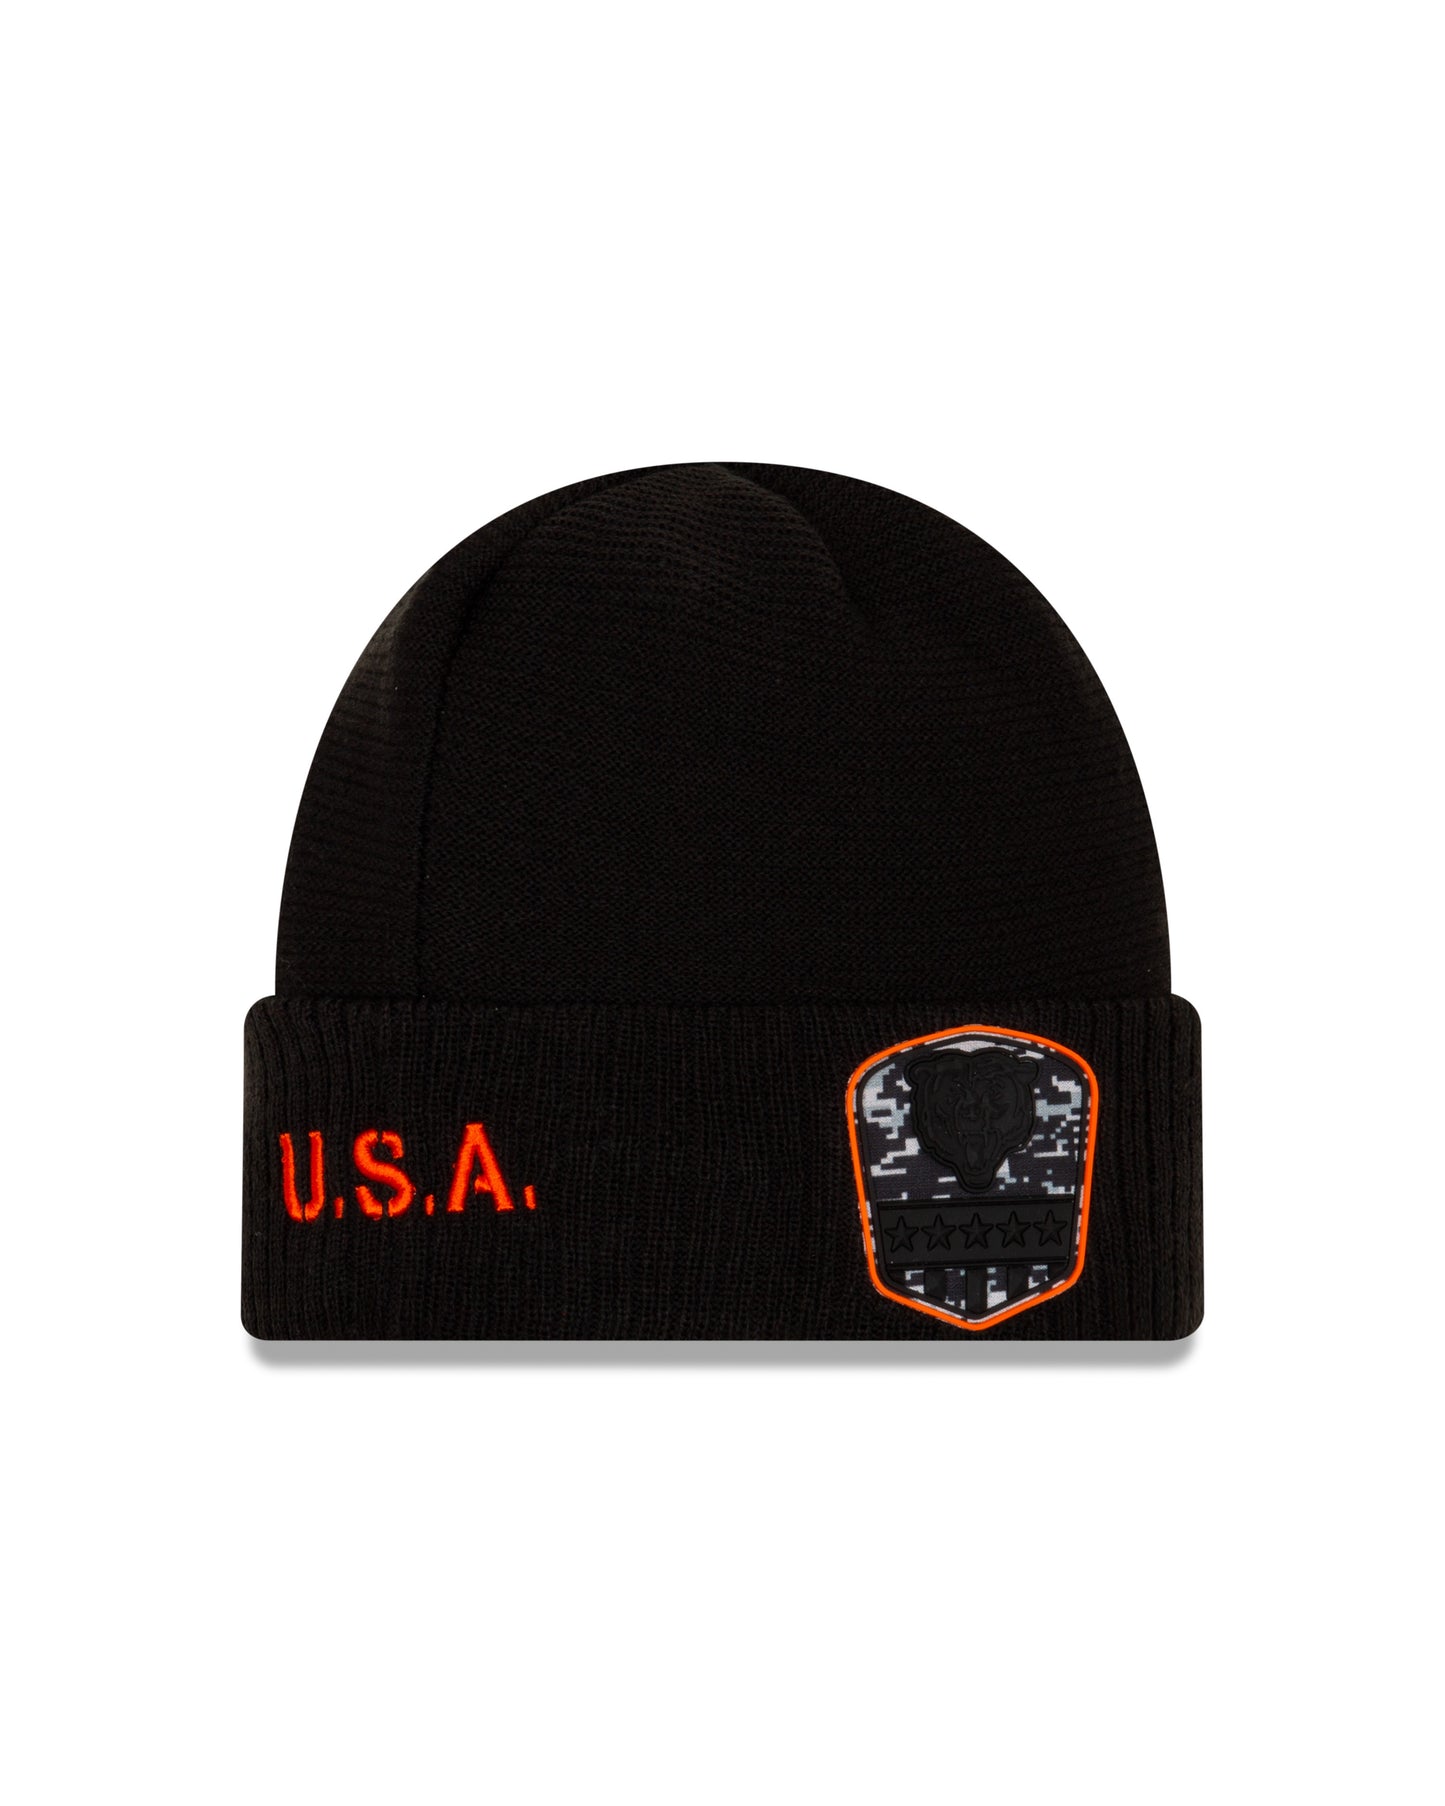 Chicago Bears New Era Black 2019 NFL Sideline Official Salute To Service Sport Knit Hat